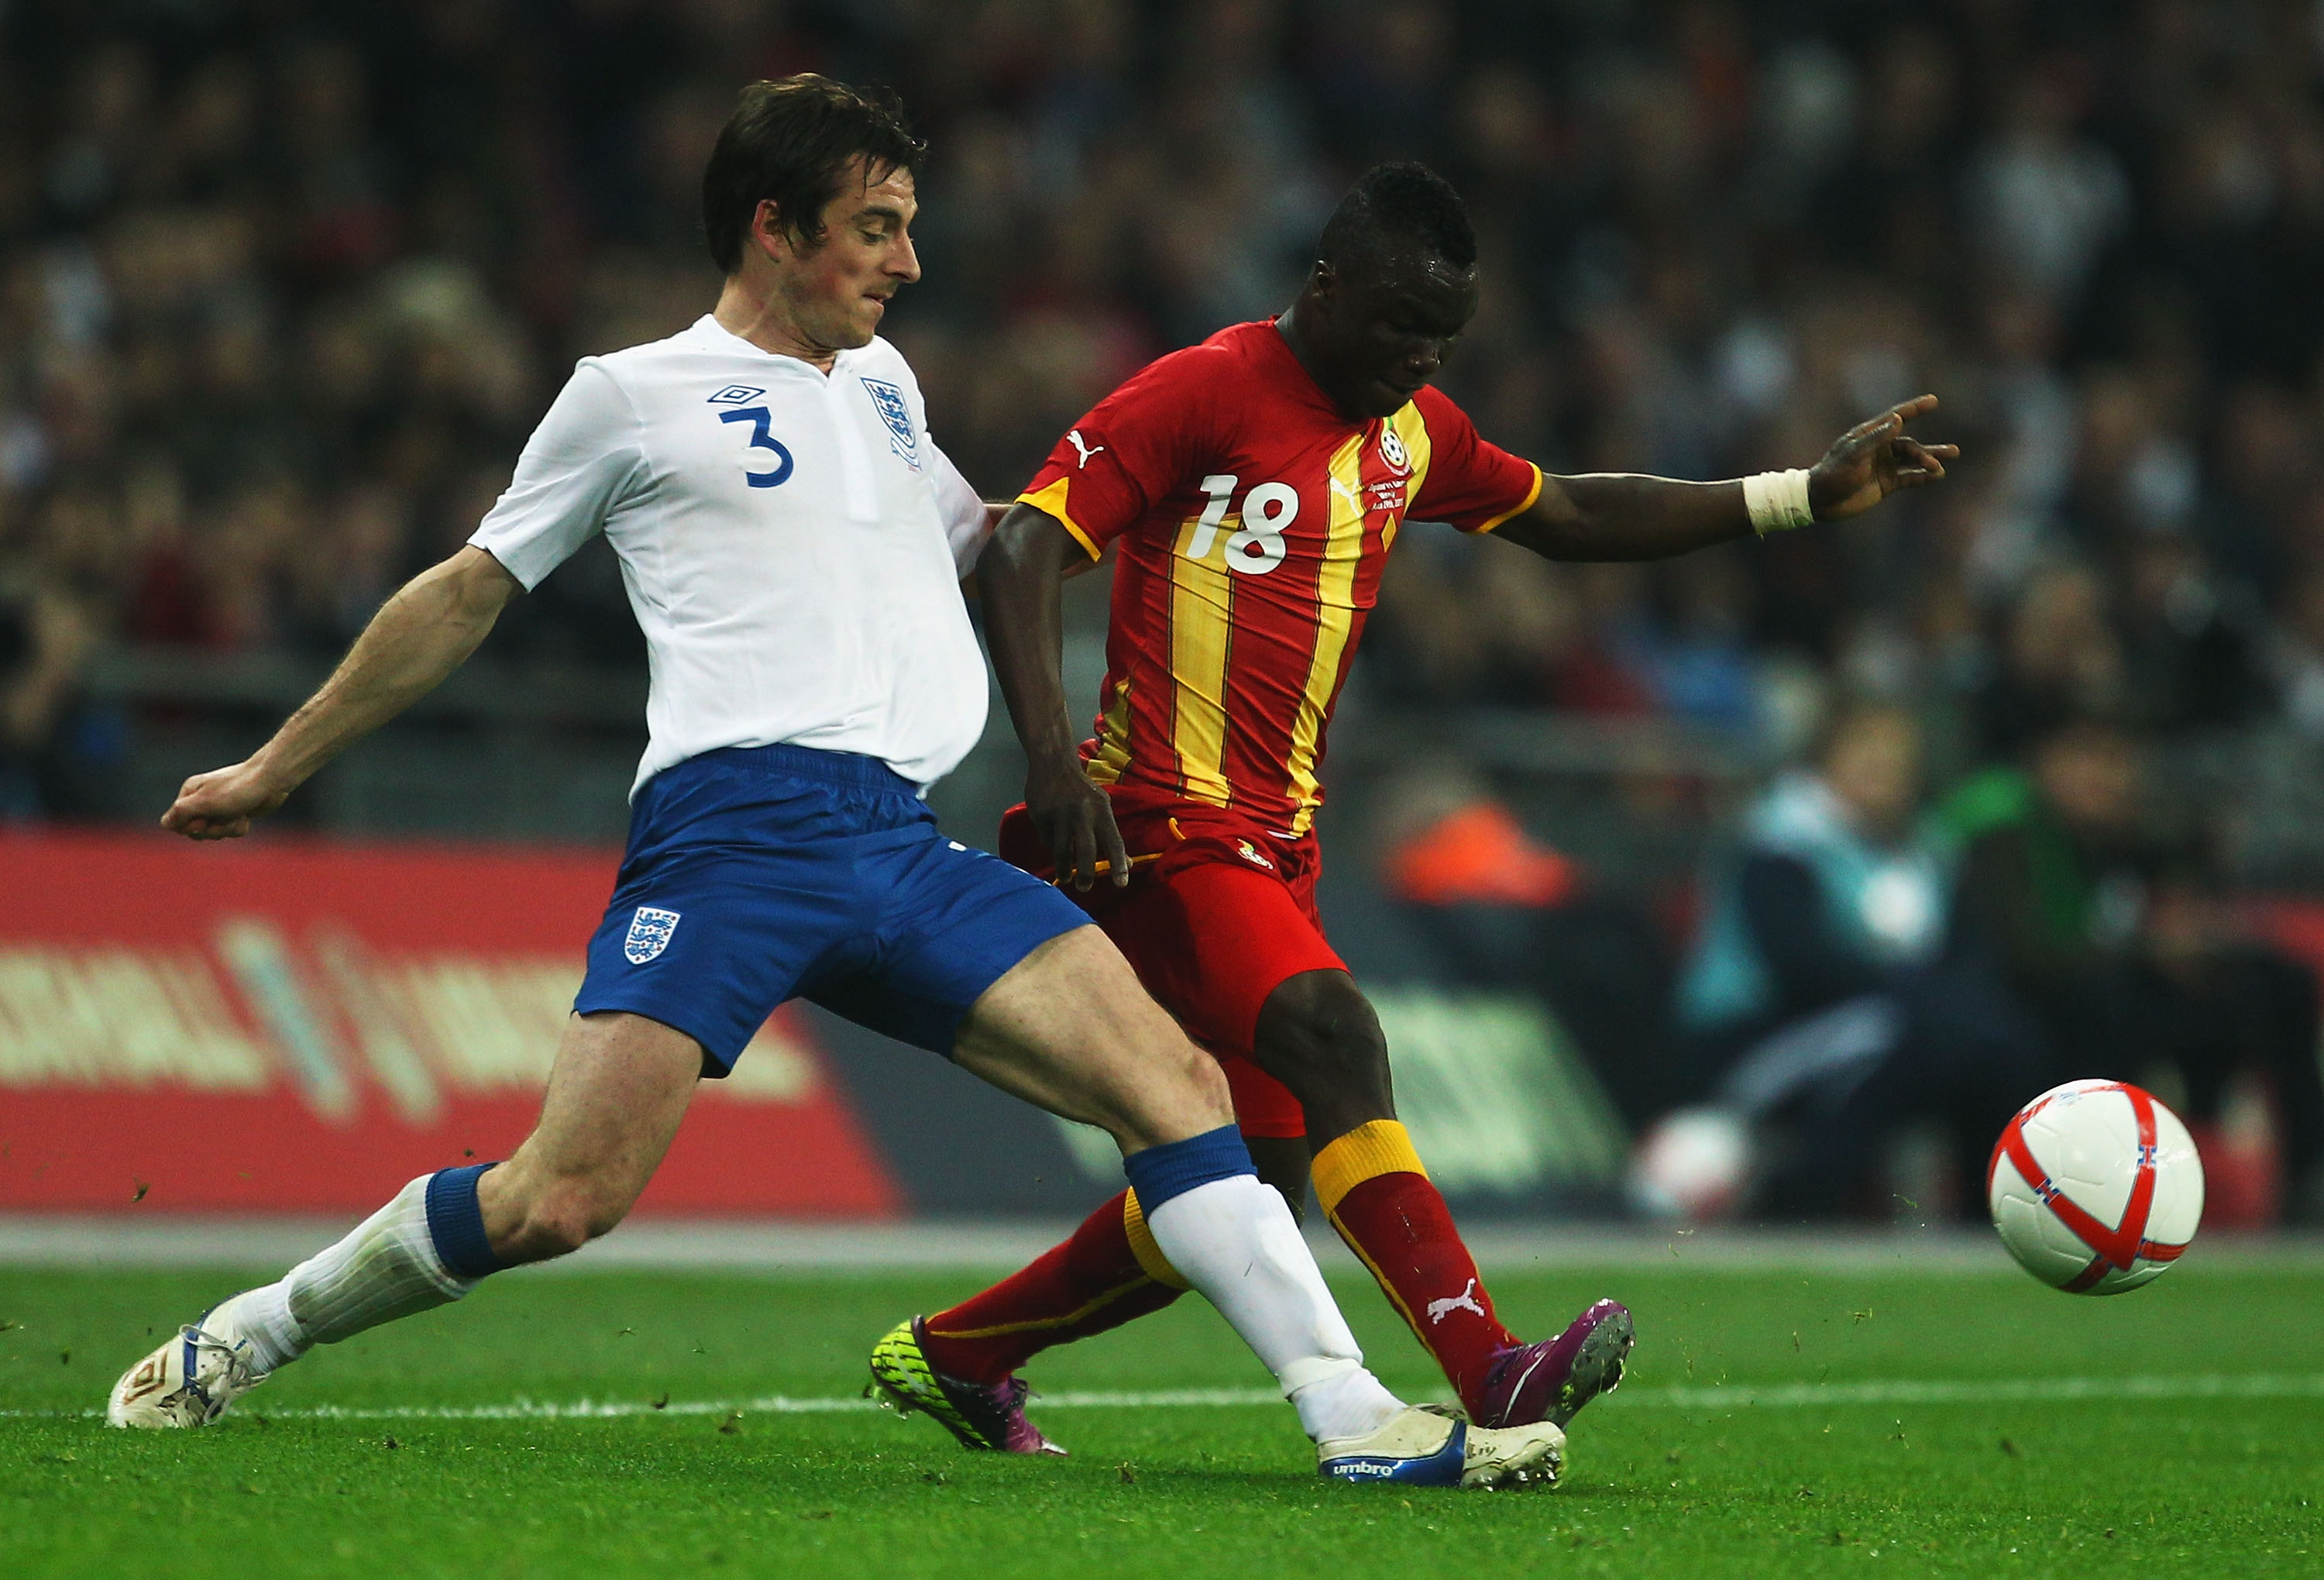 LONDON, ENGLAND - MARCH 29:  Leighton Baines of England (L) clashes with Dominic Adiyiah of Ghana during the international friendly match between England and Ghana at Wembley Stadium on March 29, 2011 in London, England.  (Photo by Julian Finney/Getty Ima